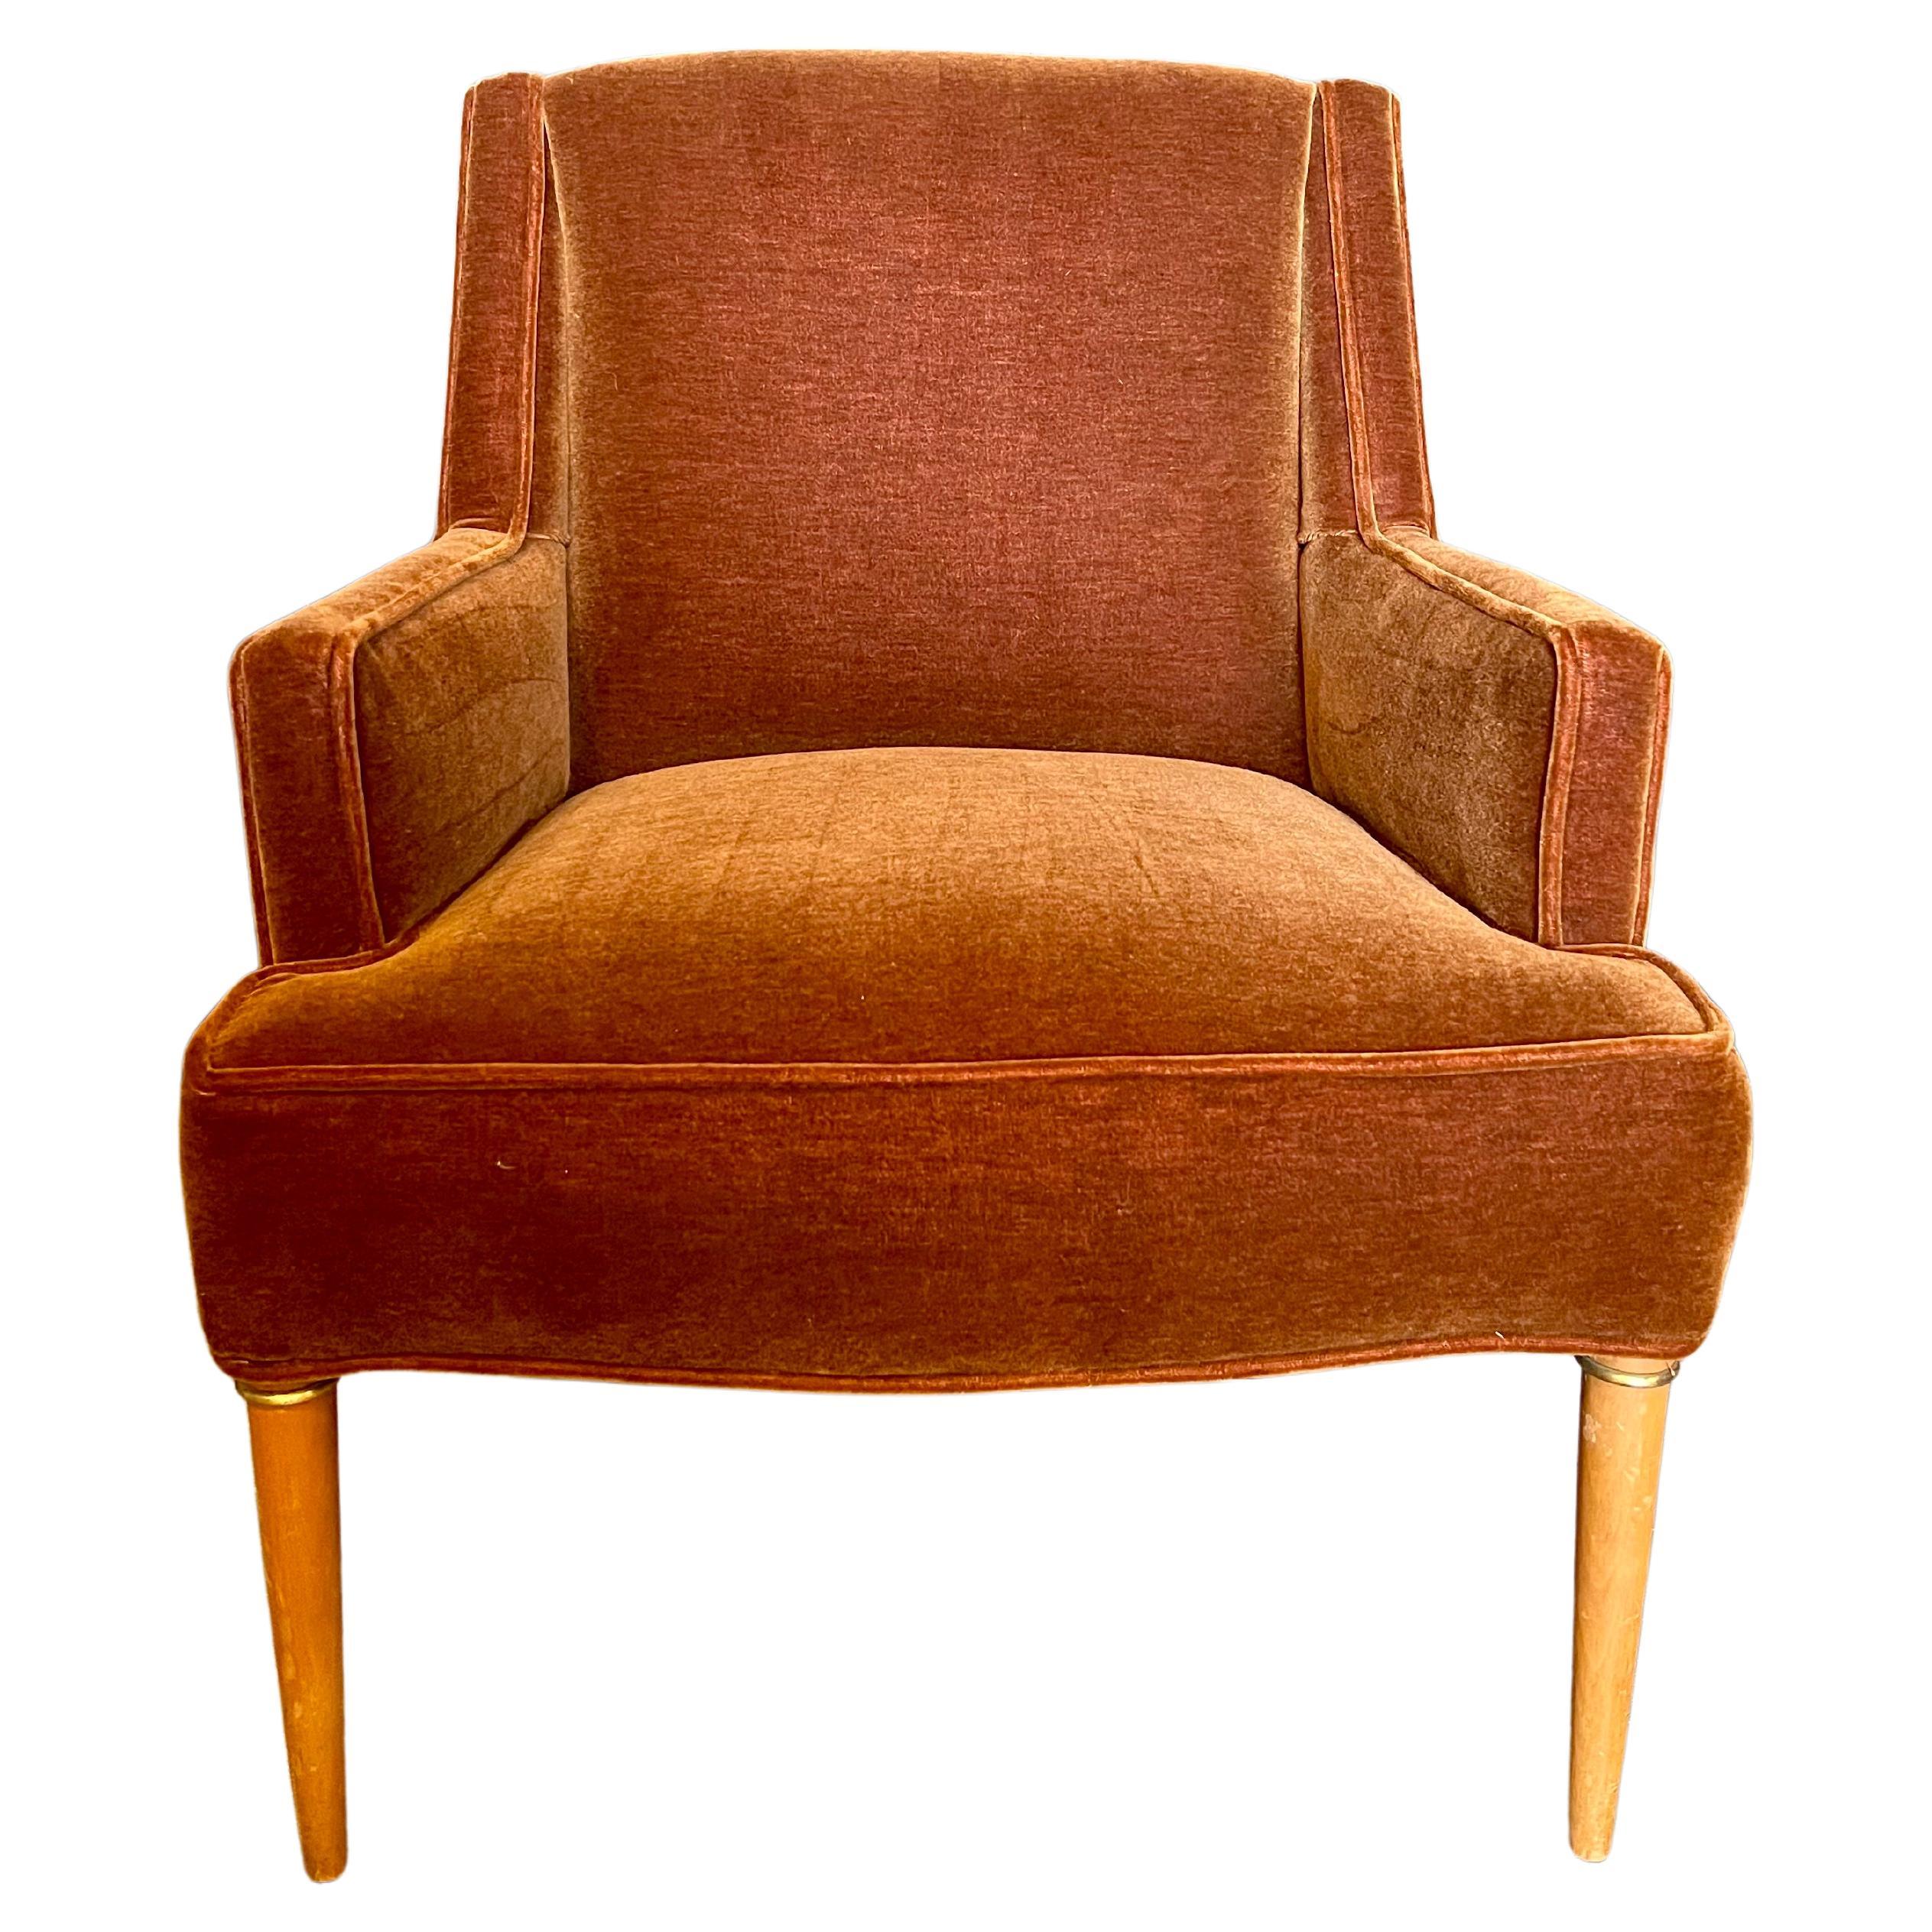 Mohair Mid-Century Accent Chair, in Rich Rust Colored Newly Upholstered Mohair